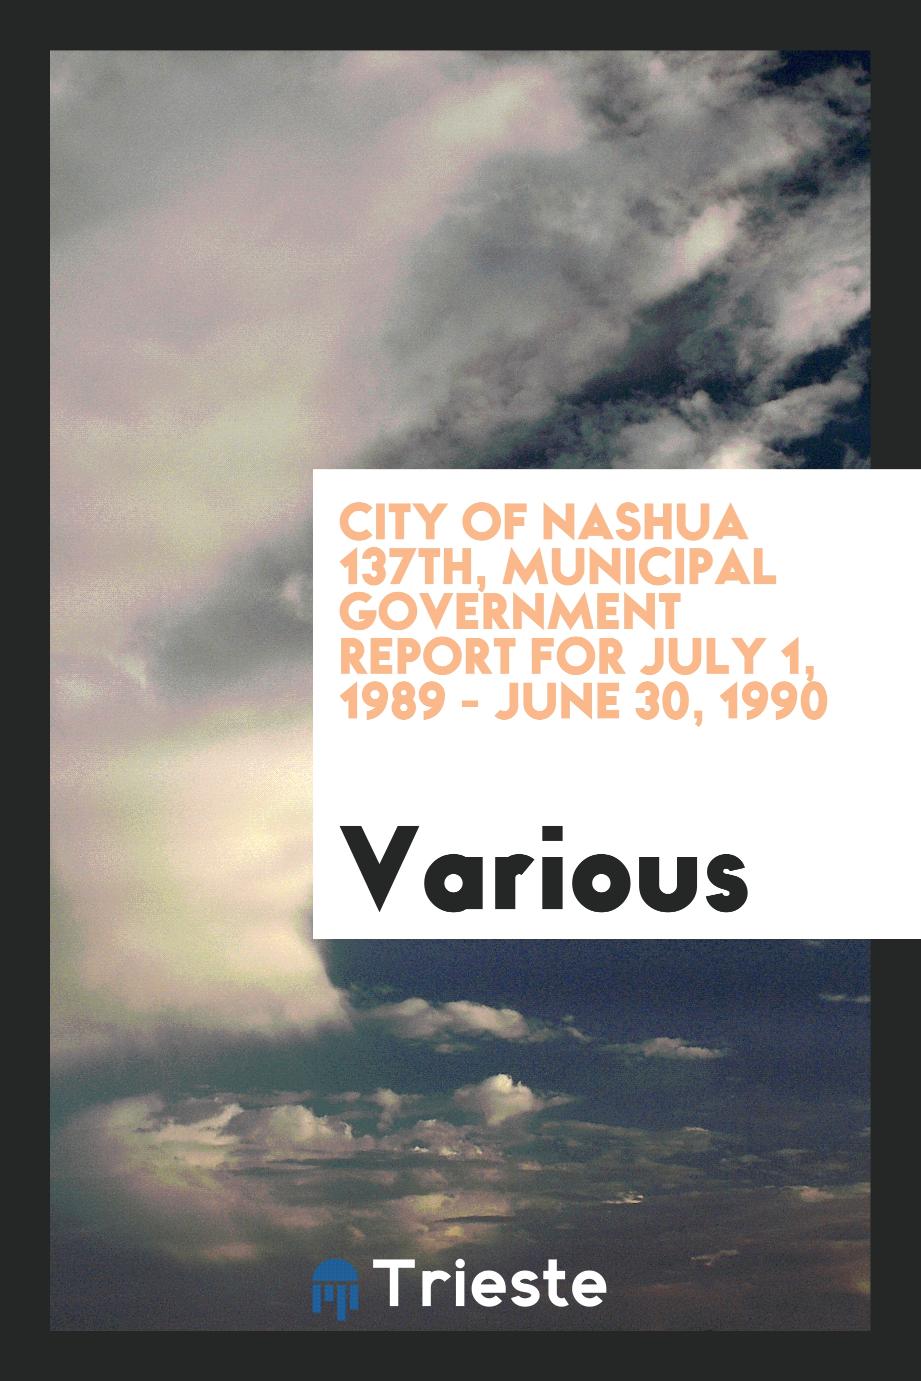 City of Nashua 137th, Municipal Government Report for july 1, 1989 - june 30, 1990